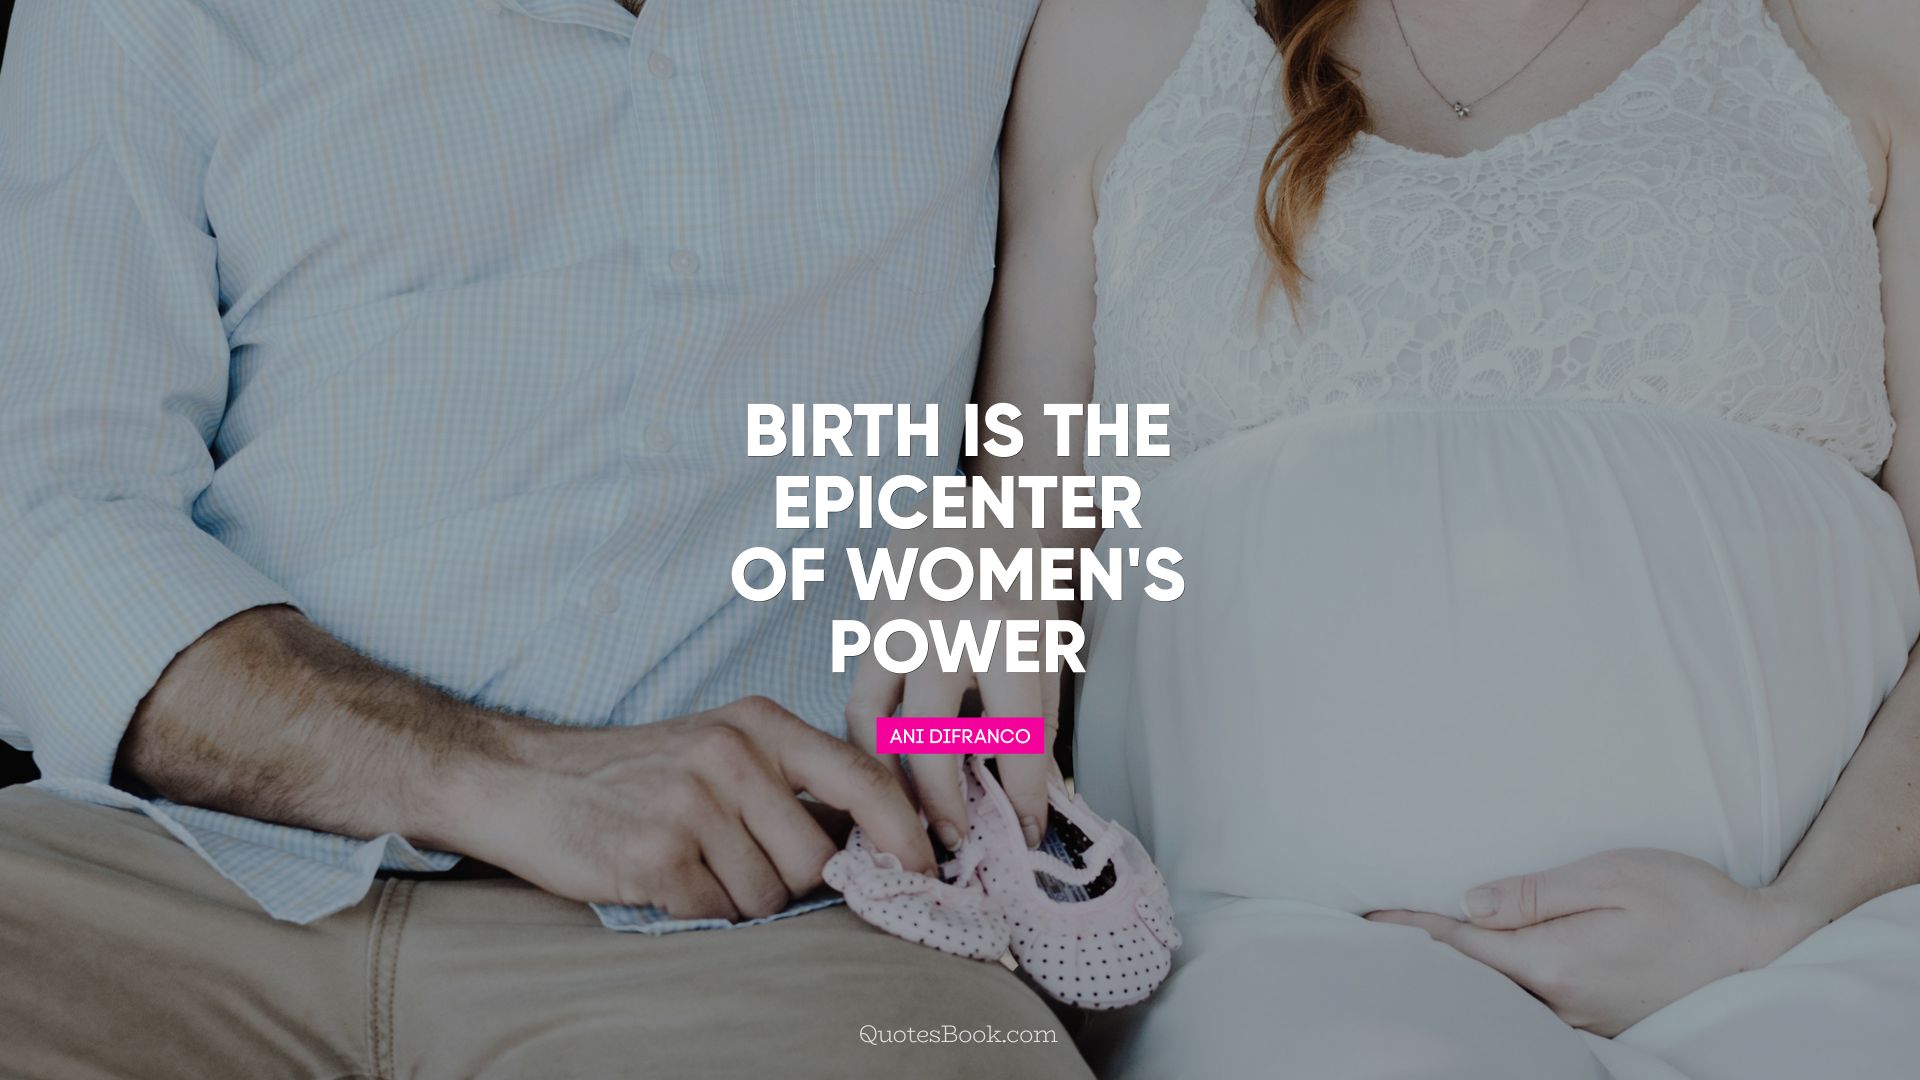 Birth is the epicenter of women's power. - Quote by Ani DiFranco